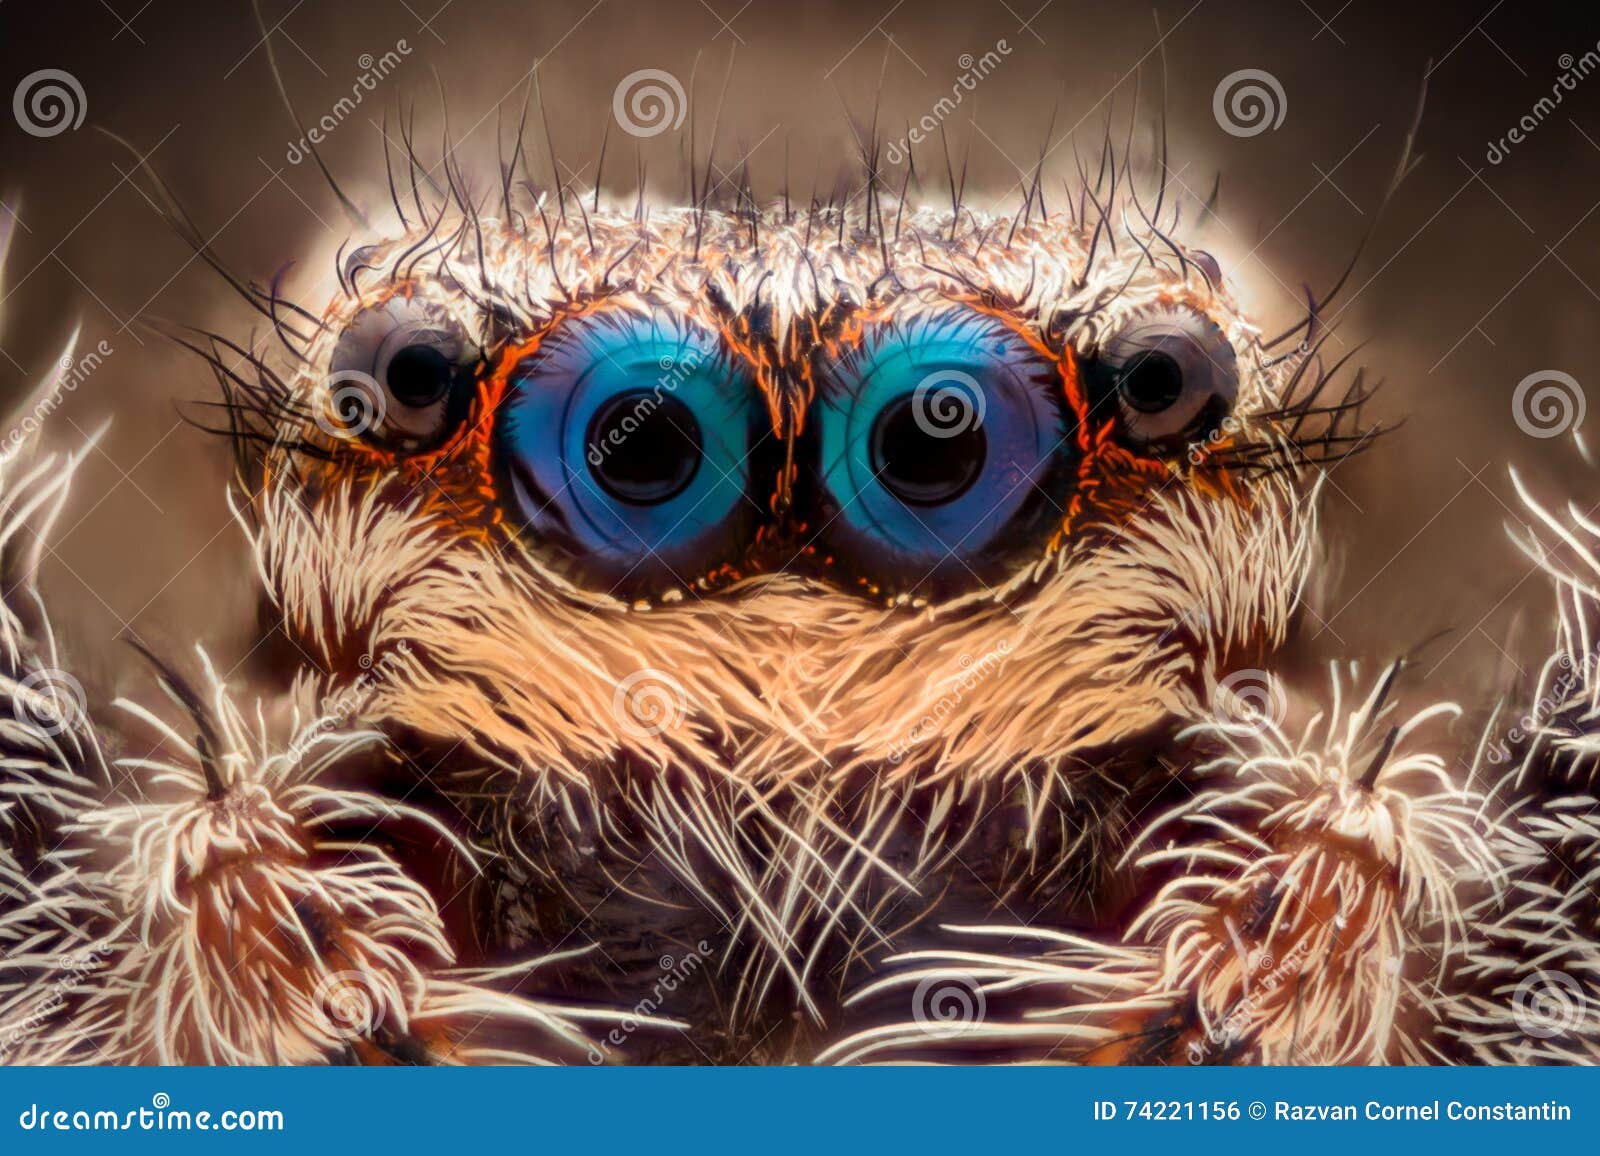 extreme magnification - jumping spider portrait